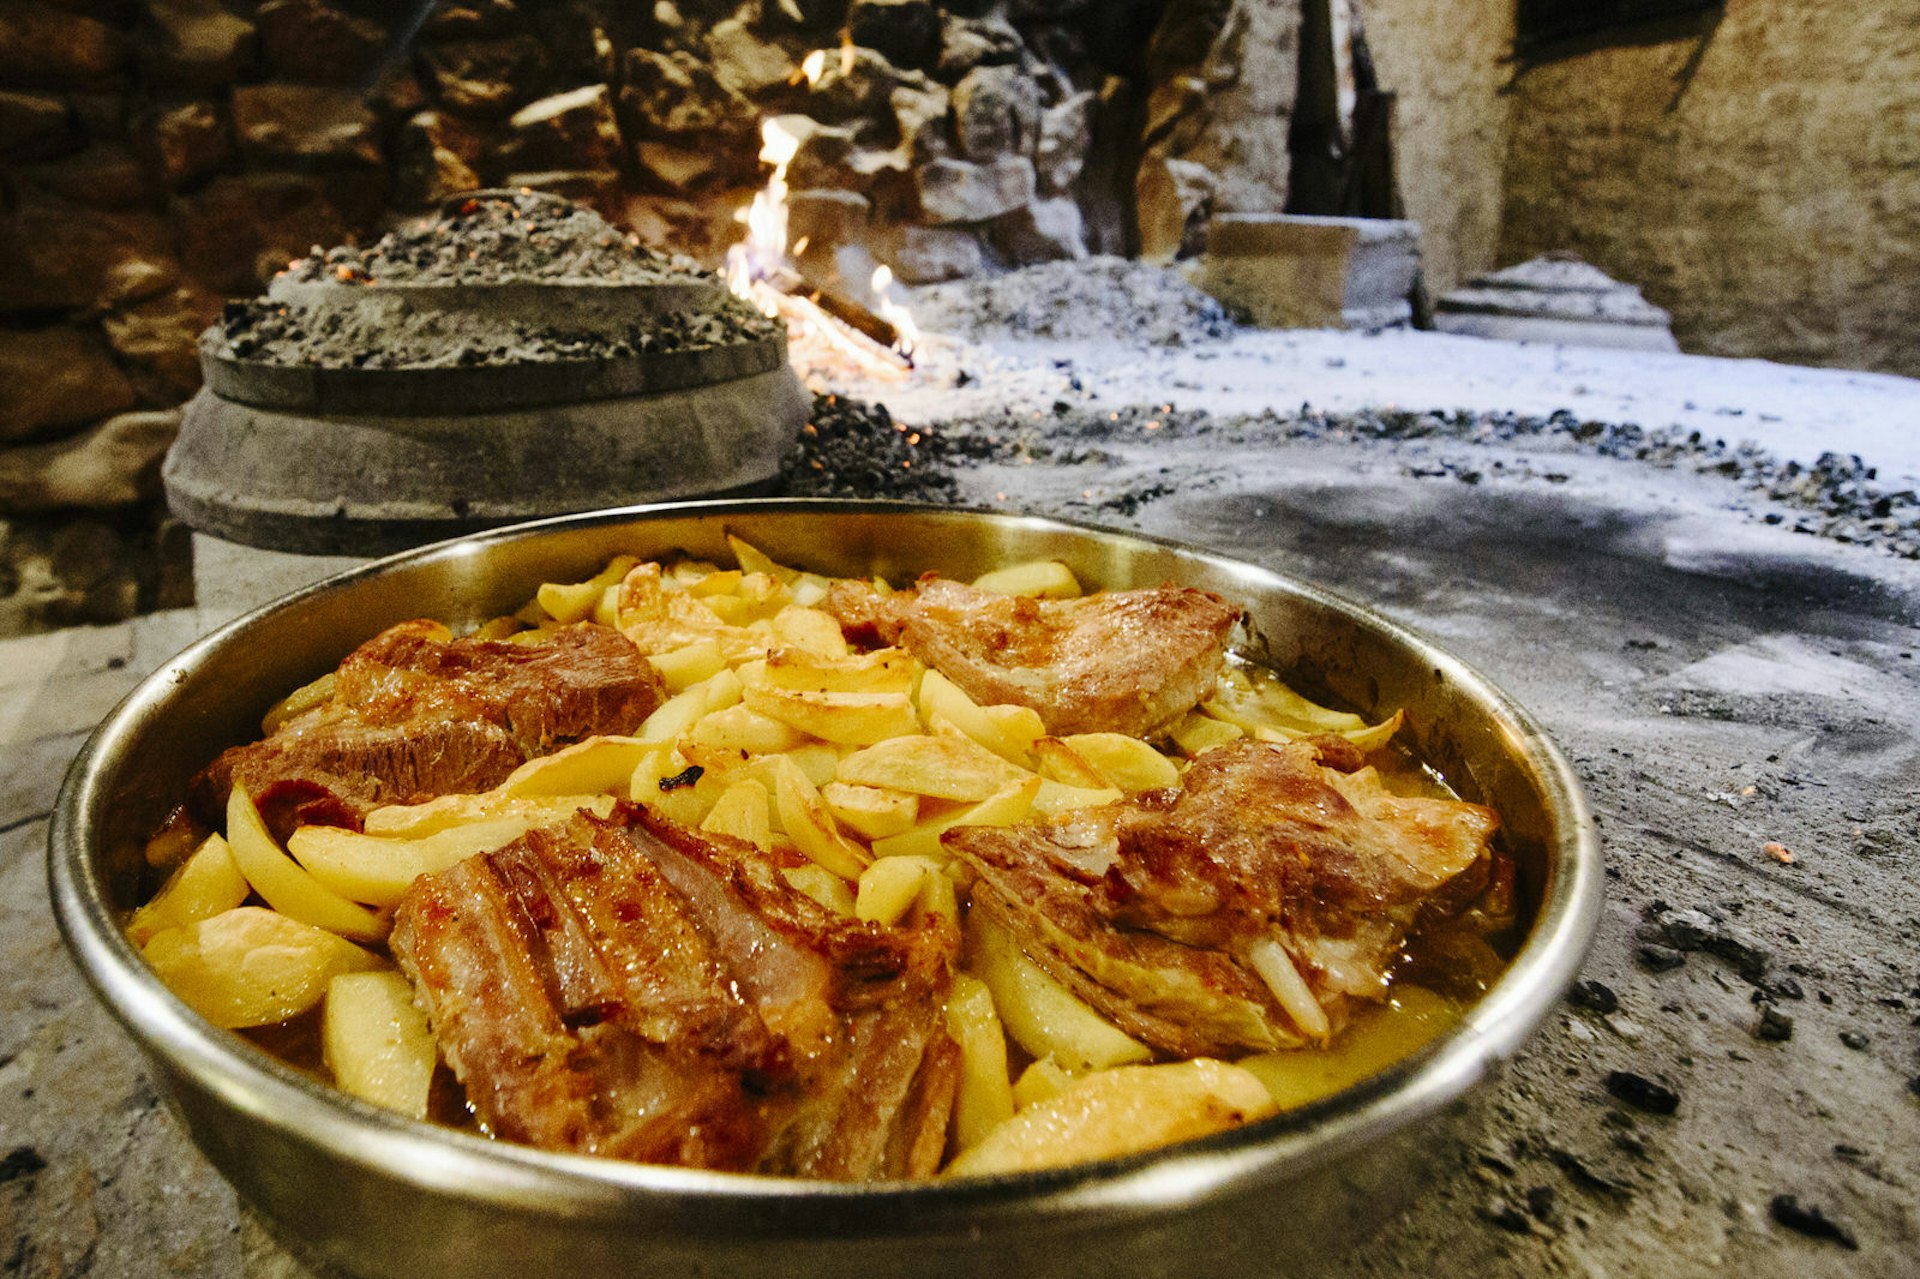 A metal dish containing meat and potatoes, with the ashes of a fireplace and the peka lid in the background © Wine & Food Hedonism